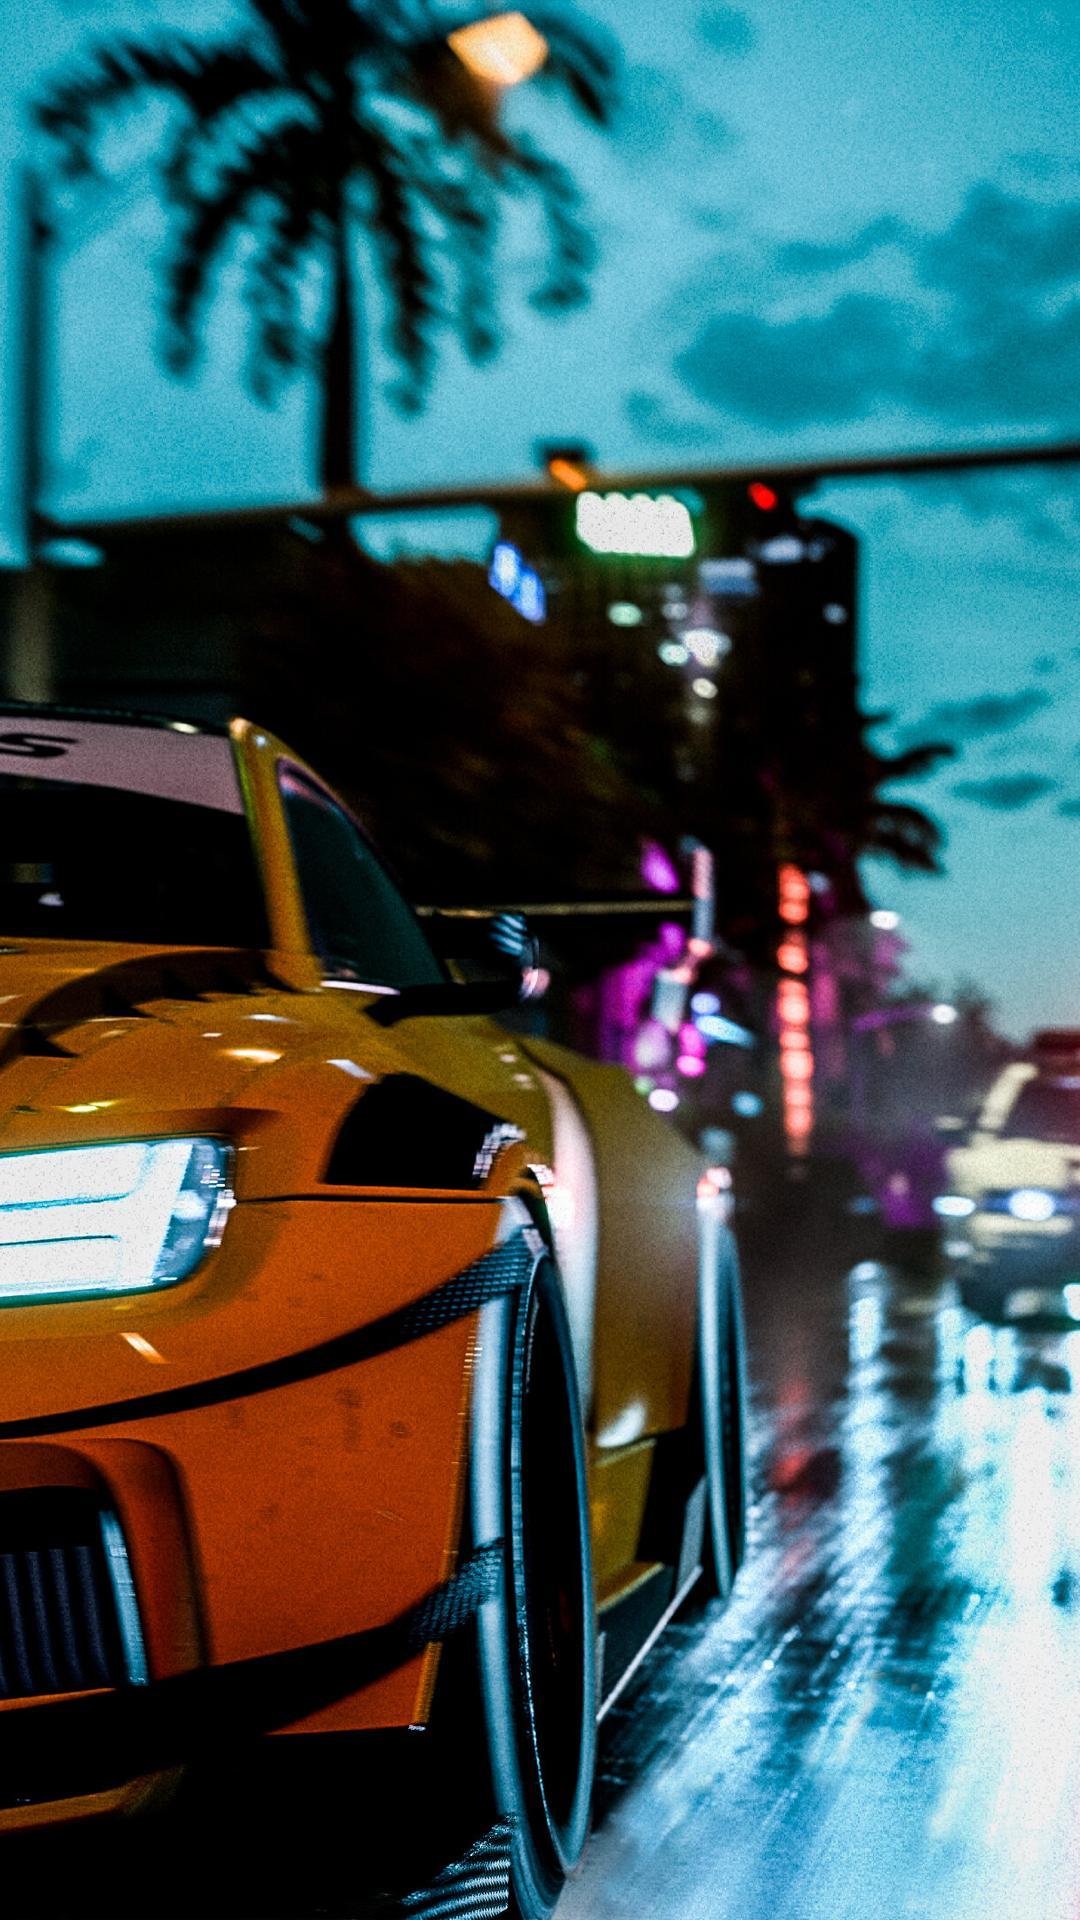 NFS HEAT 4K HD wallpaper for Android